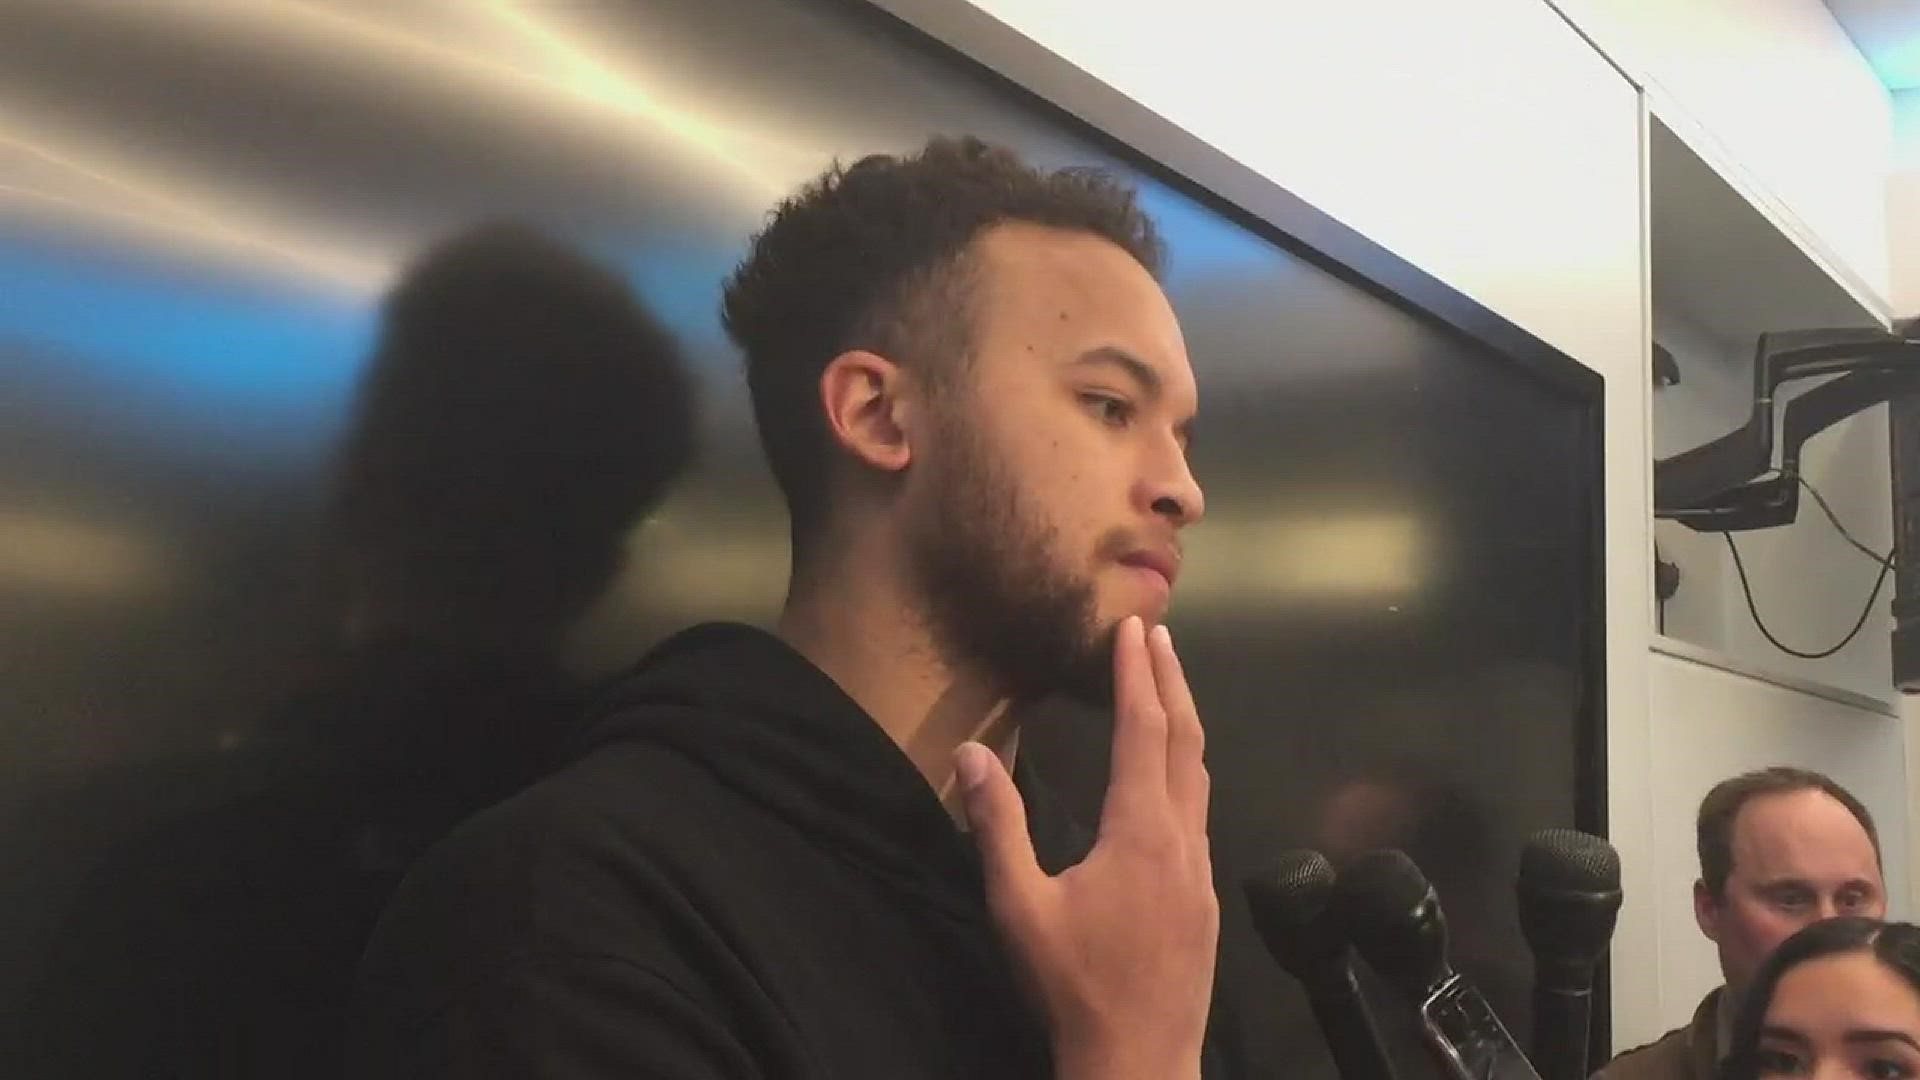 Kyle Anderson on the disappointment of losing again